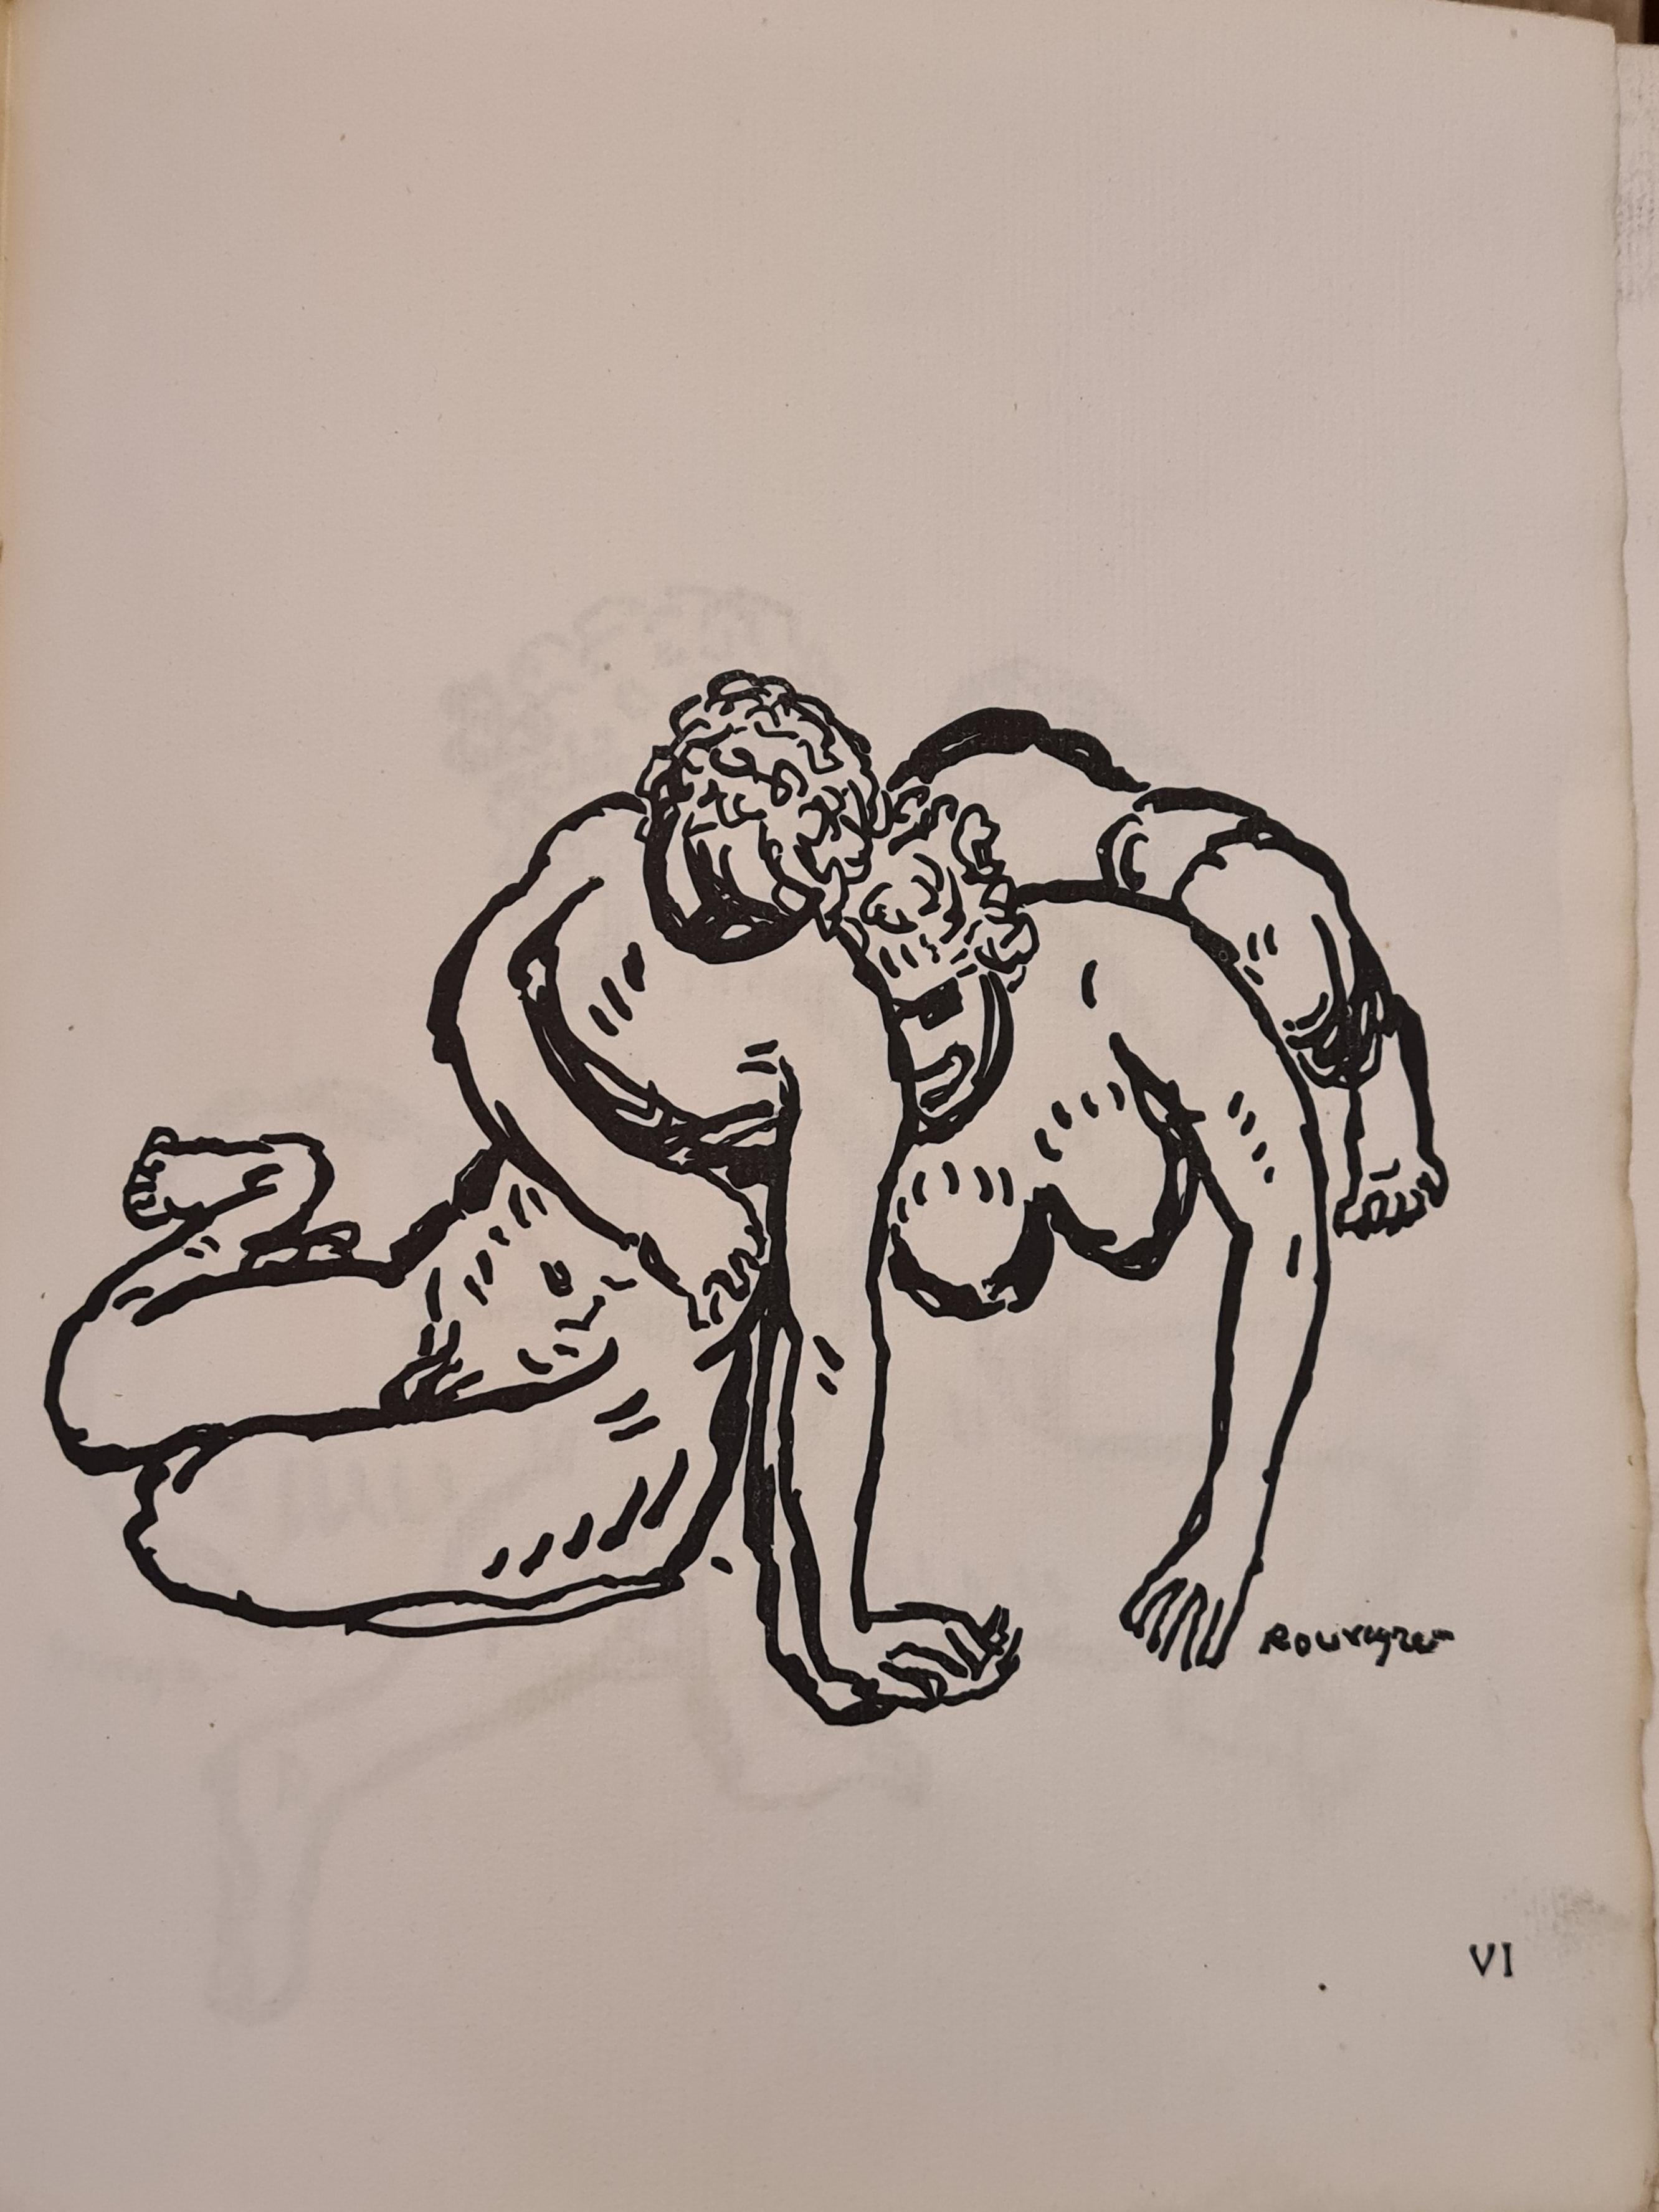 Mort de l'Amour, Series of 8 Erotic Limited-Edition Wood Engravings. For Sale 1